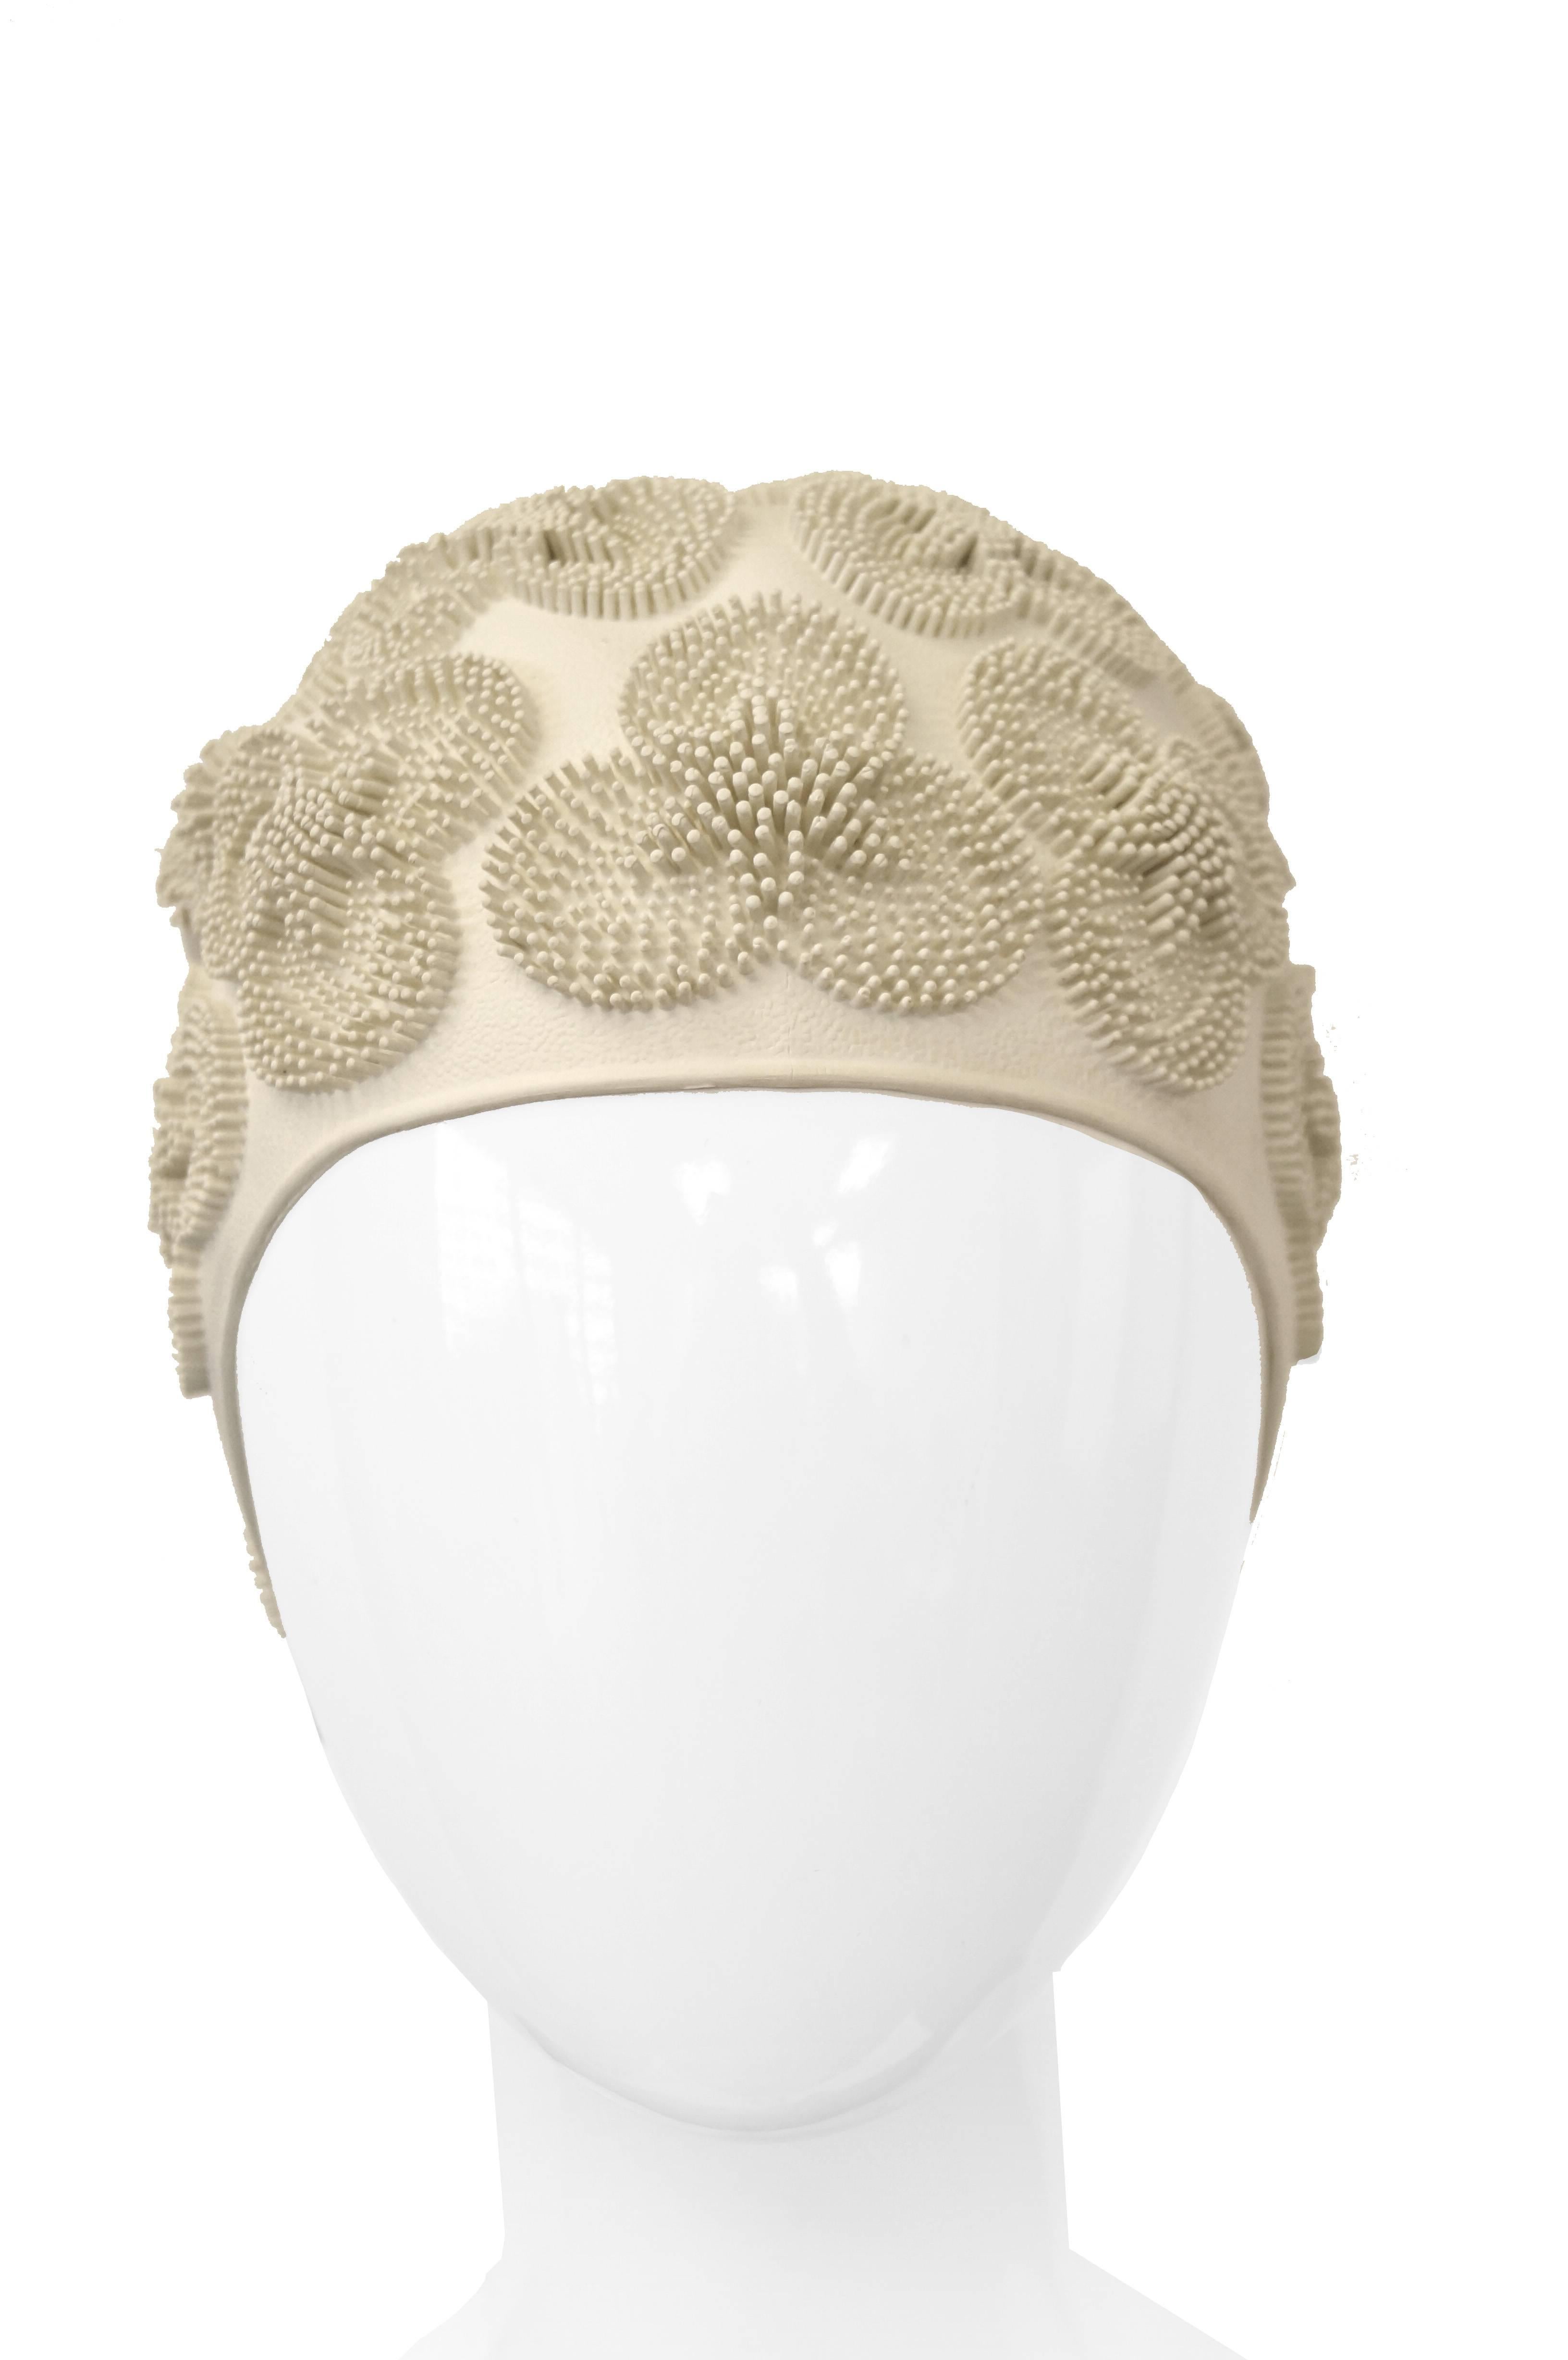 Floral 1950s bathing beauty winter white swim cap! The elastic rubber cap features a three - petal flower print with three - dimensional rubber posts. 

Small-Medium